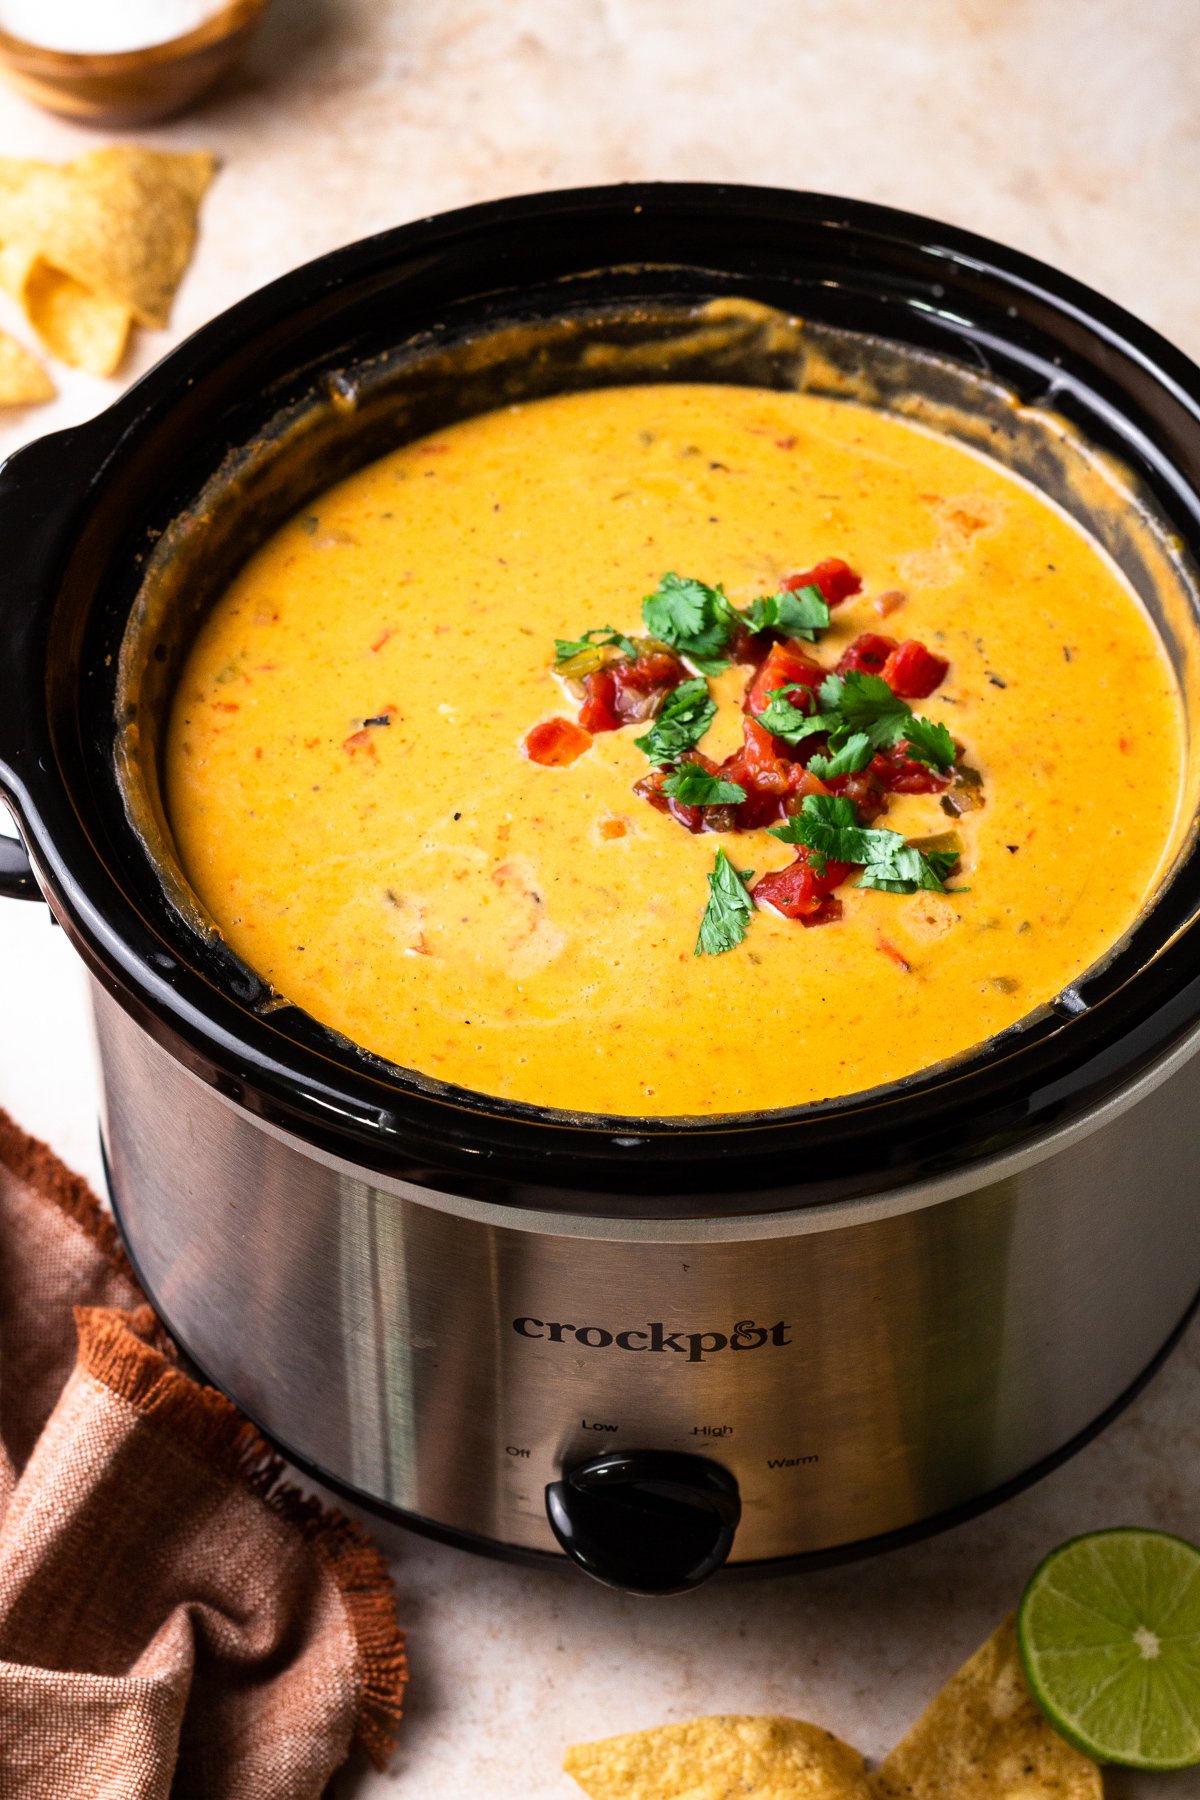 https://www.thecookierookie.com/wp-content/uploads/2019/12/how-to-crockpot-queso-recipe-5.jpg